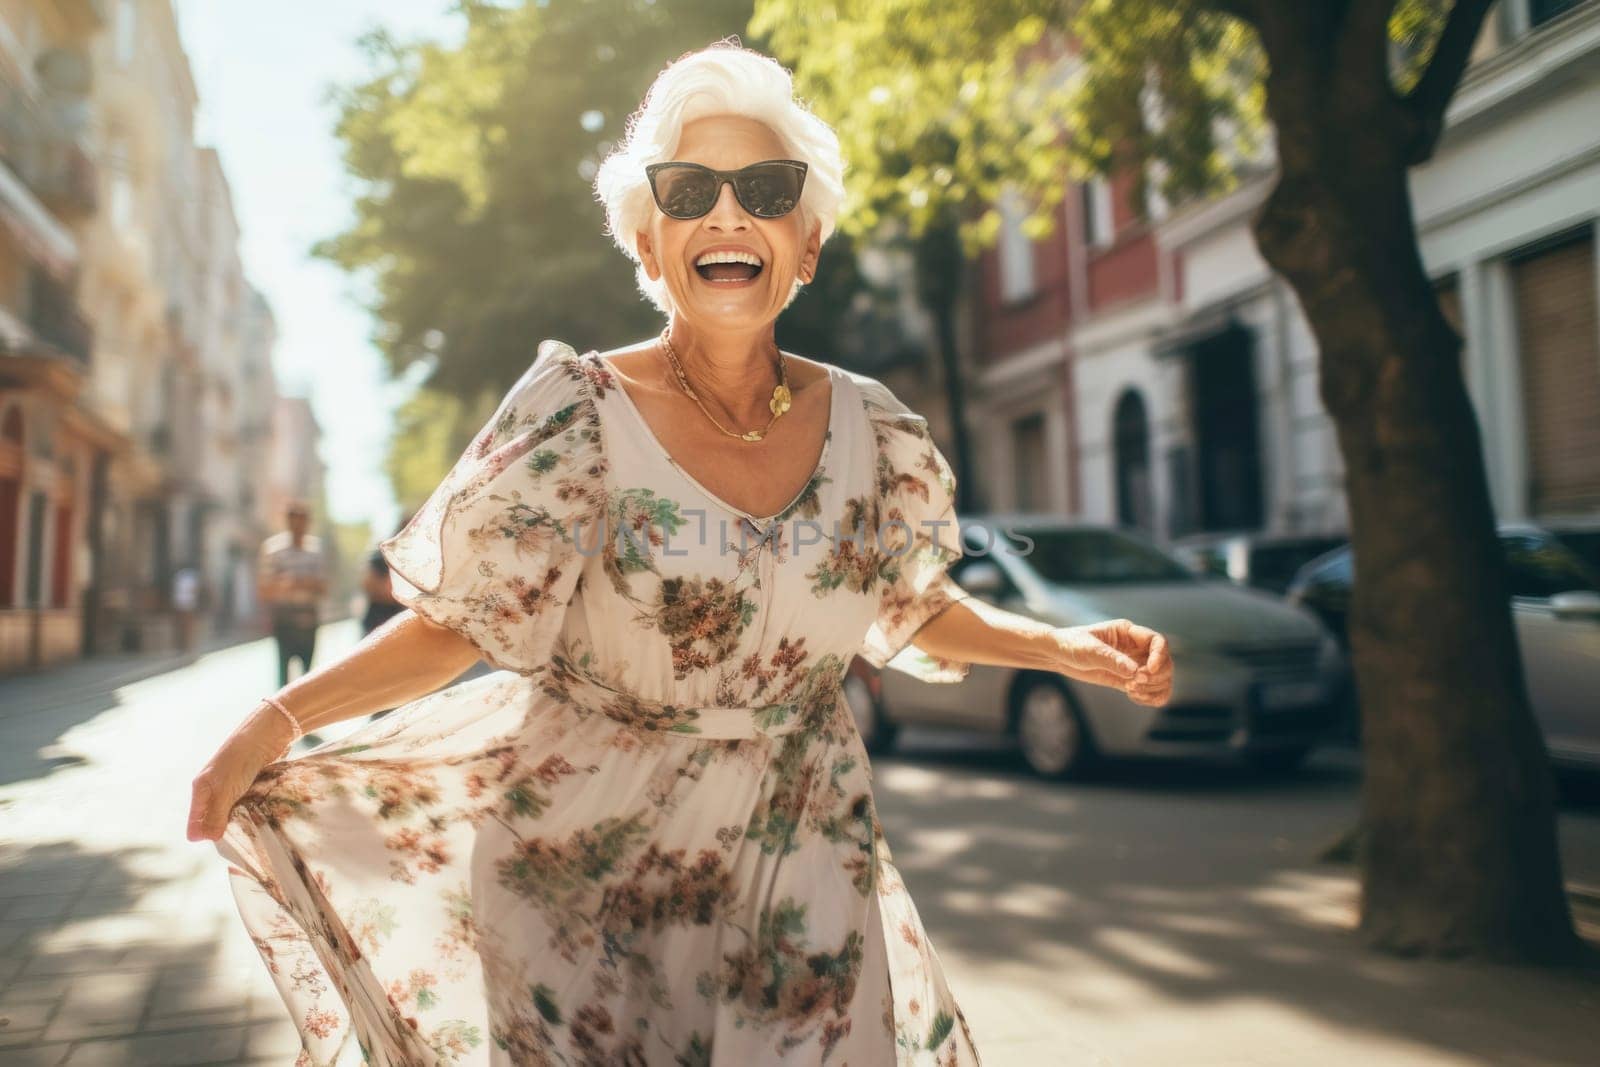 Elderly woman dancing on city street. Active seniors and urban lifestyle concept. Candid portrait with copy space for design and print. Joyful motion and freedom theme